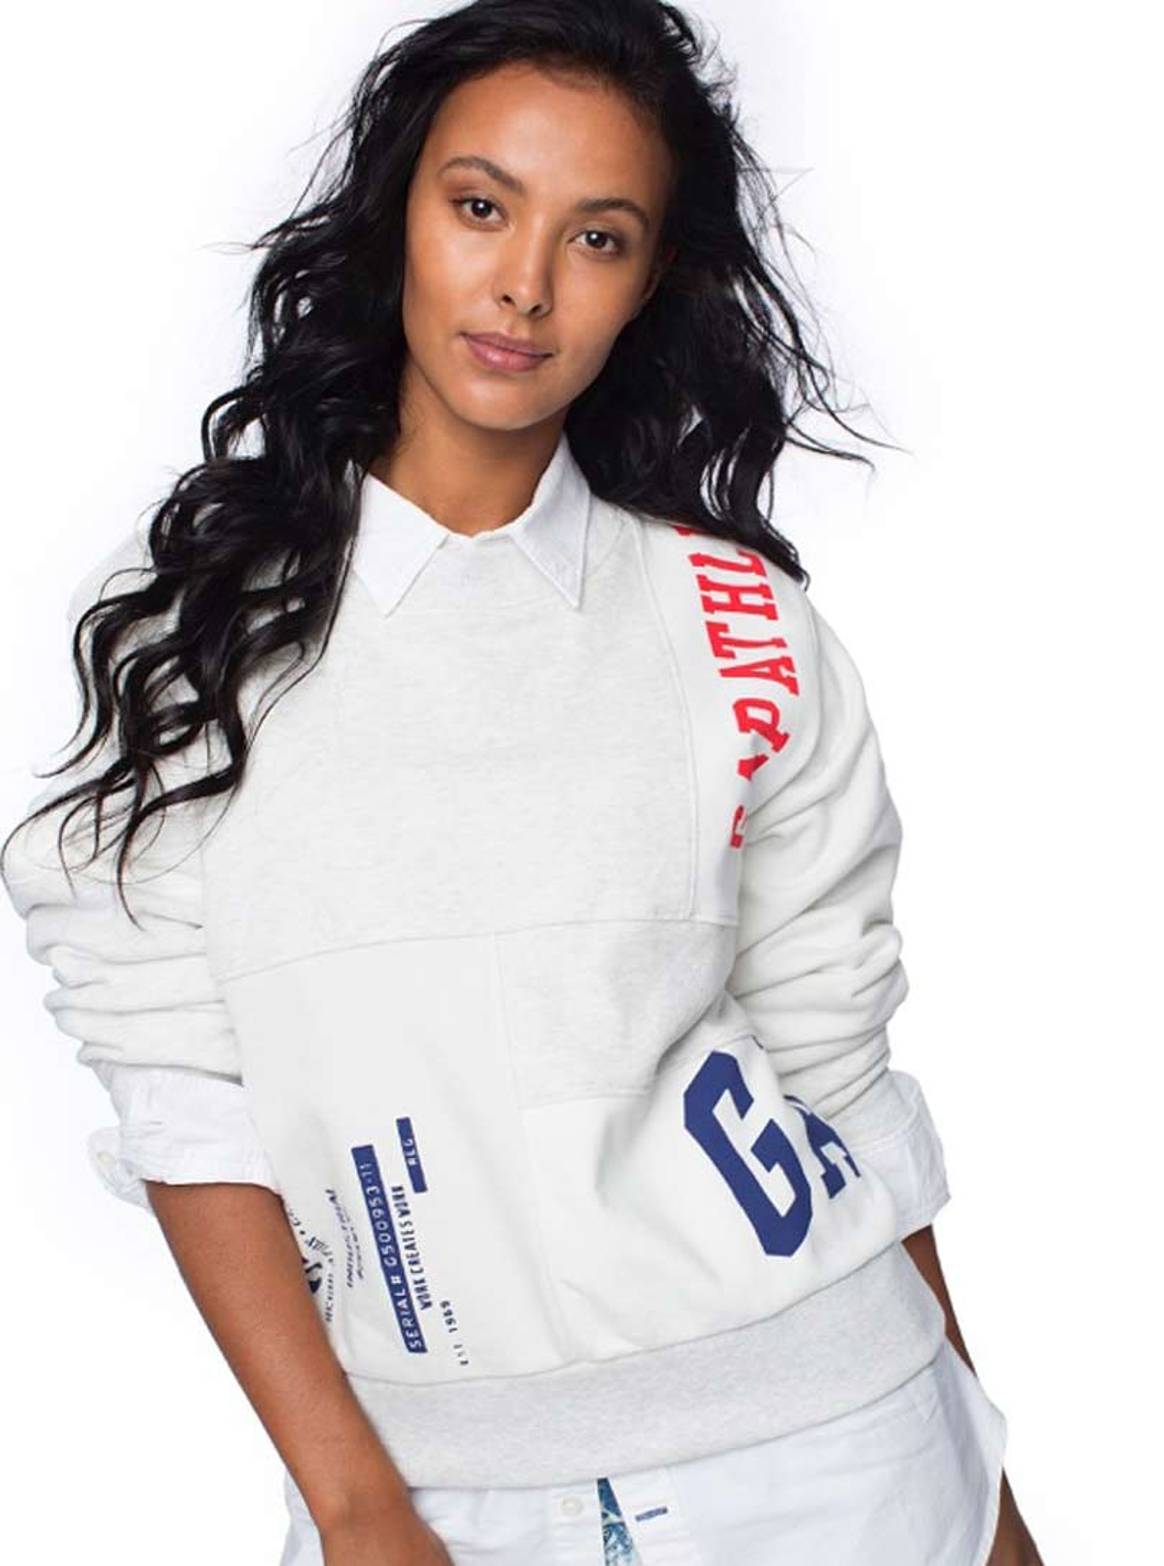 Gap celebrates logo with archive reissue collection